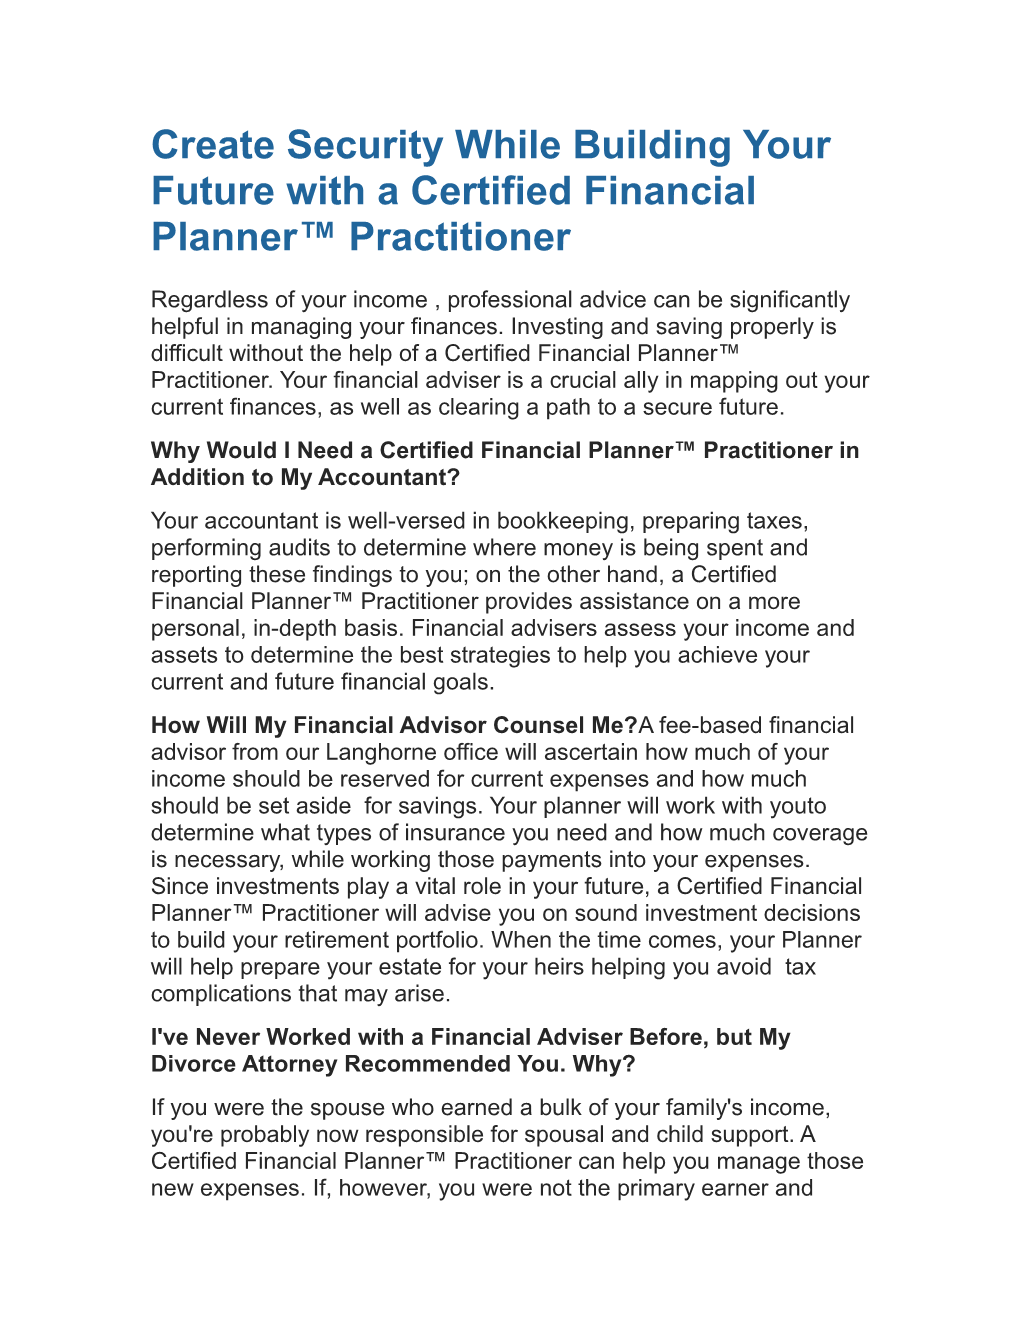 Create Security While Building Your Future with a Certified Financial Planner Practitioner